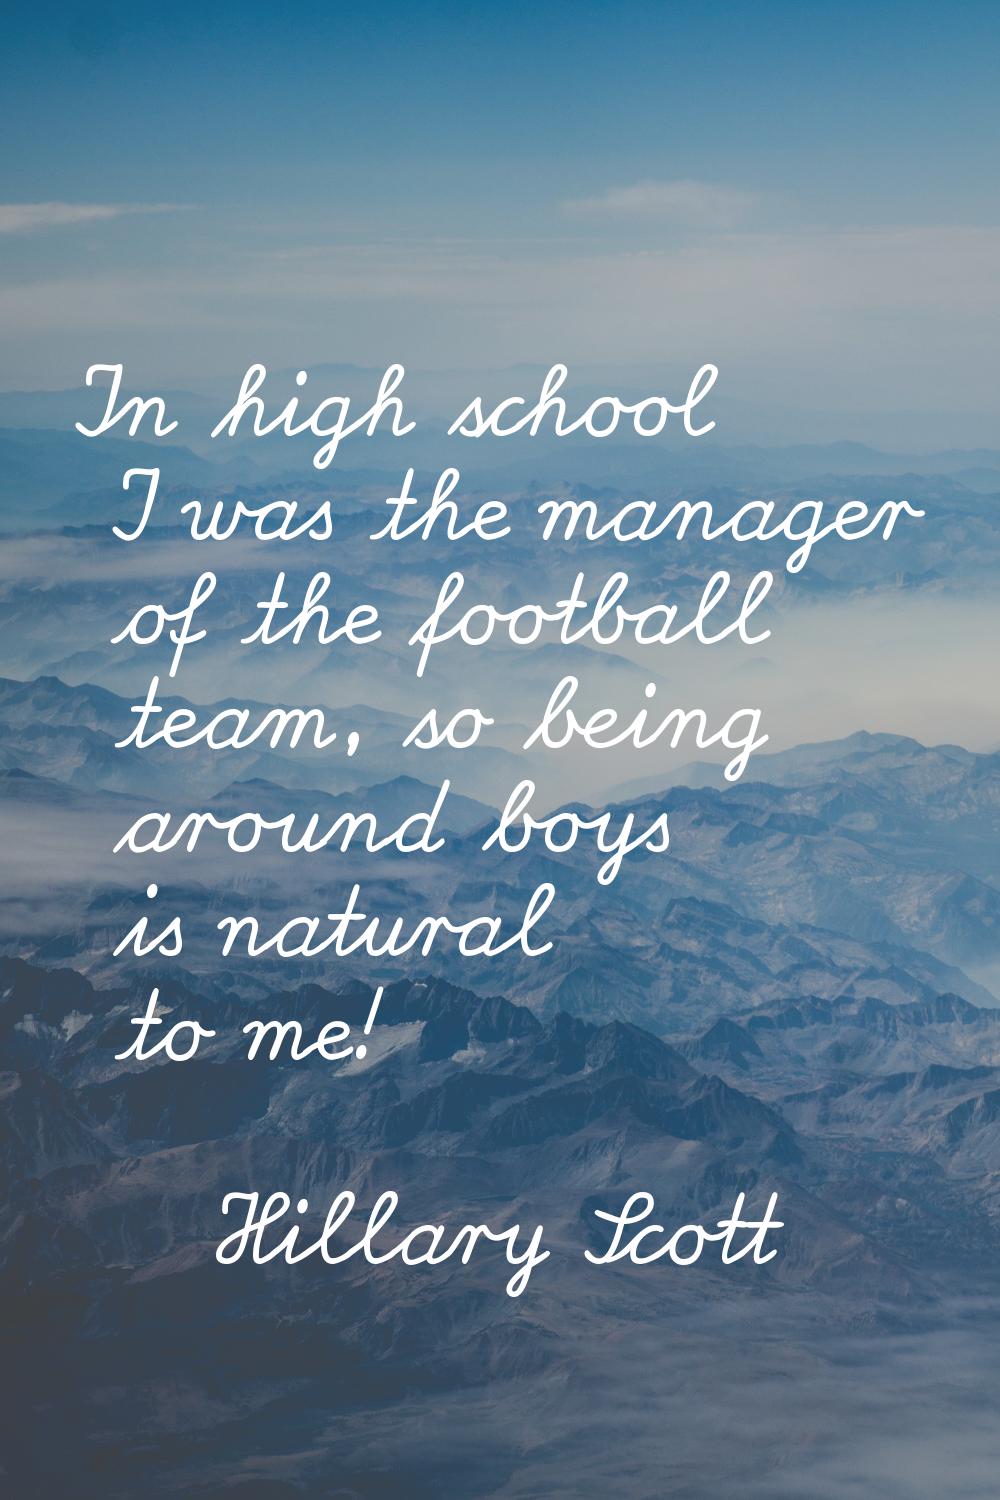 In high school I was the manager of the football team, so being around boys is natural to me!